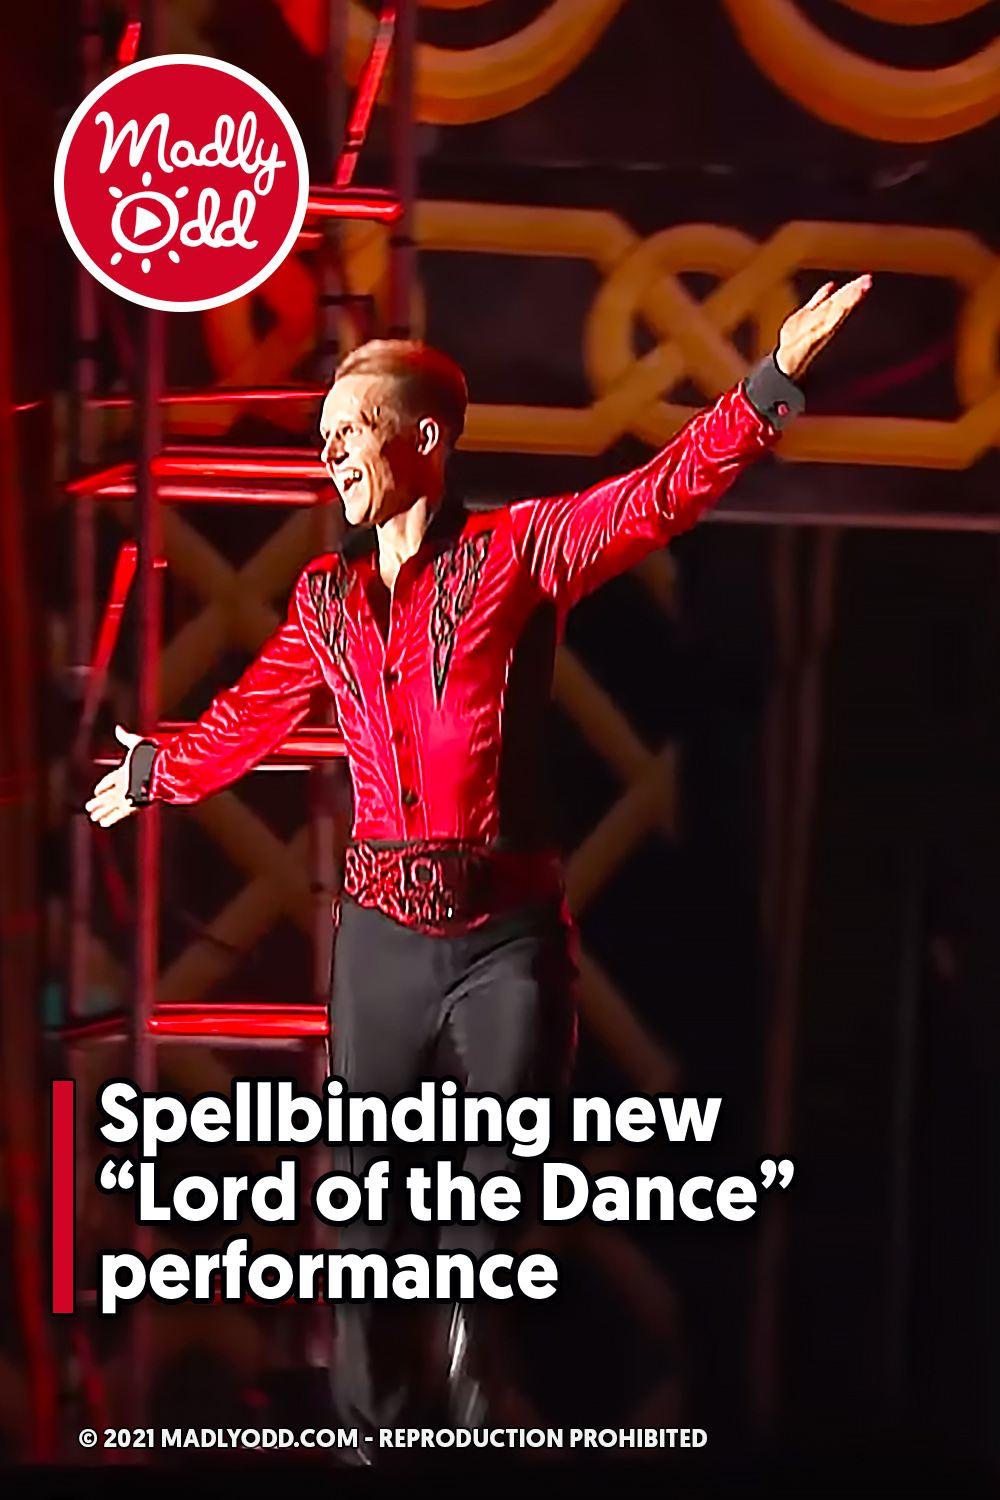 Spellbinding new “Lord of the Dance” performance